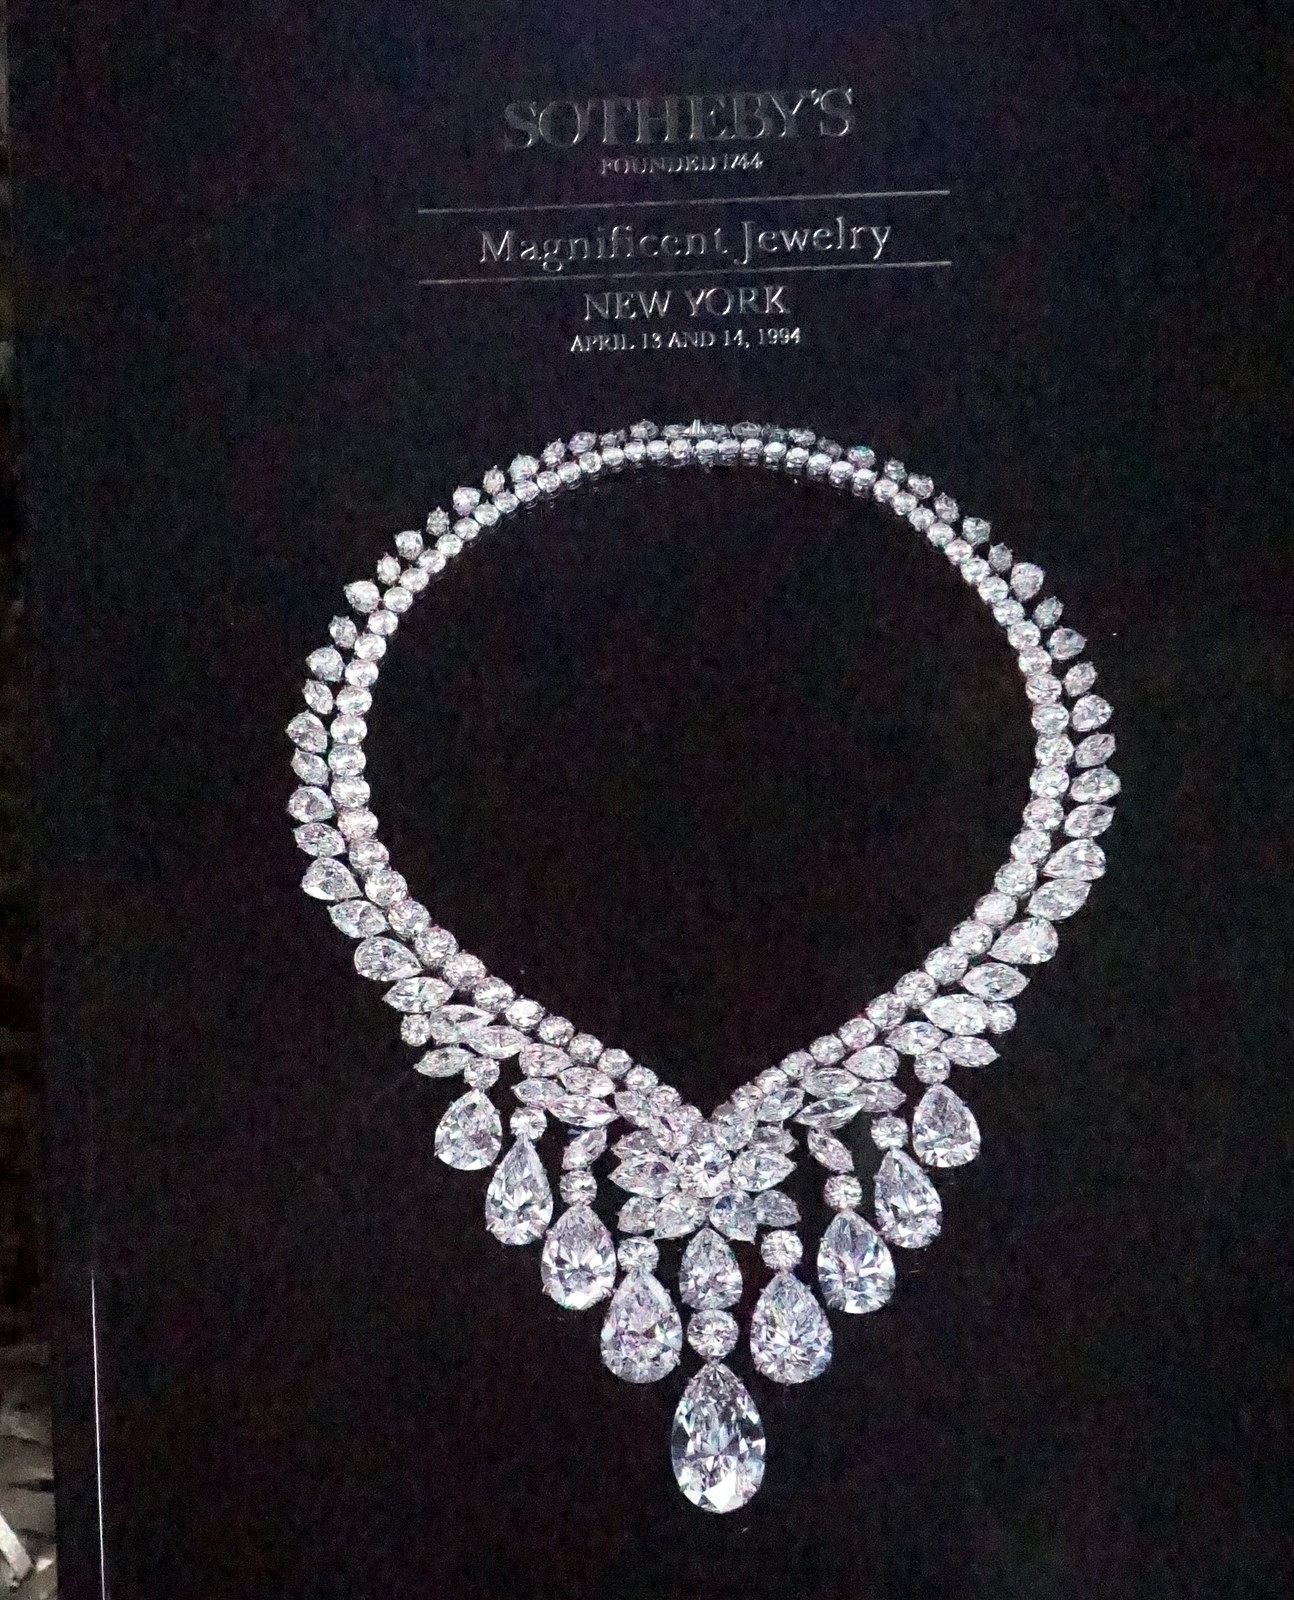 IH SOTHEBY'S MAGNIFICENT JEWELS NEW YORK 4/13/94 AND 4/14/94 SALE CODE